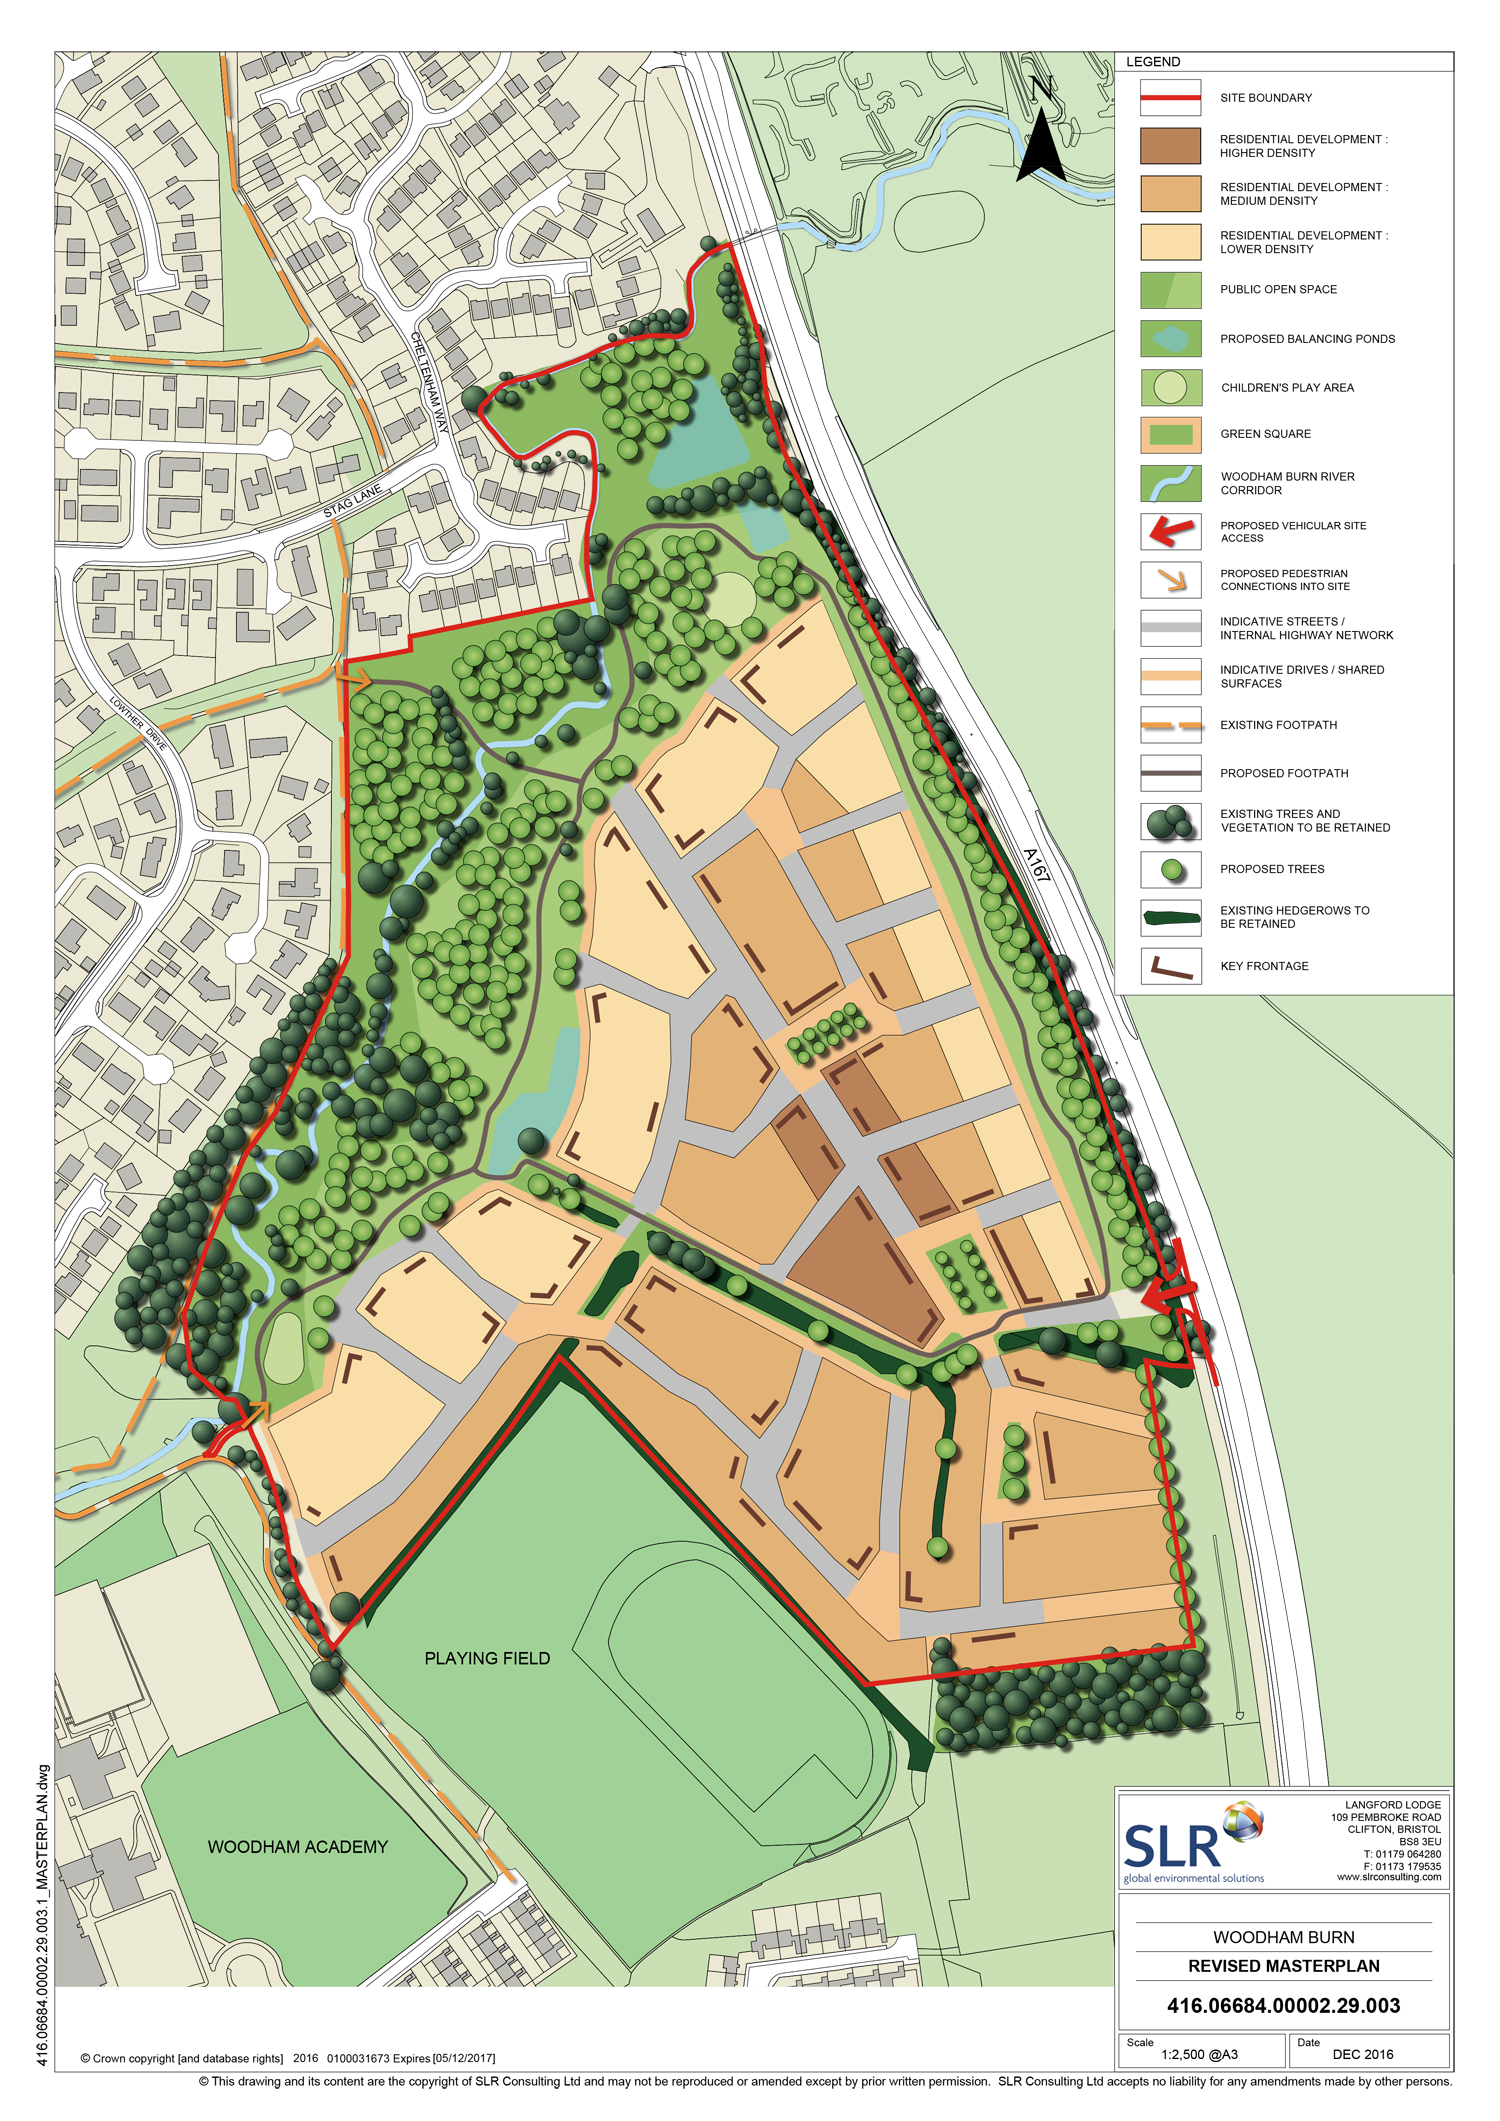 Appeal to Build 430 Houses at Woodham